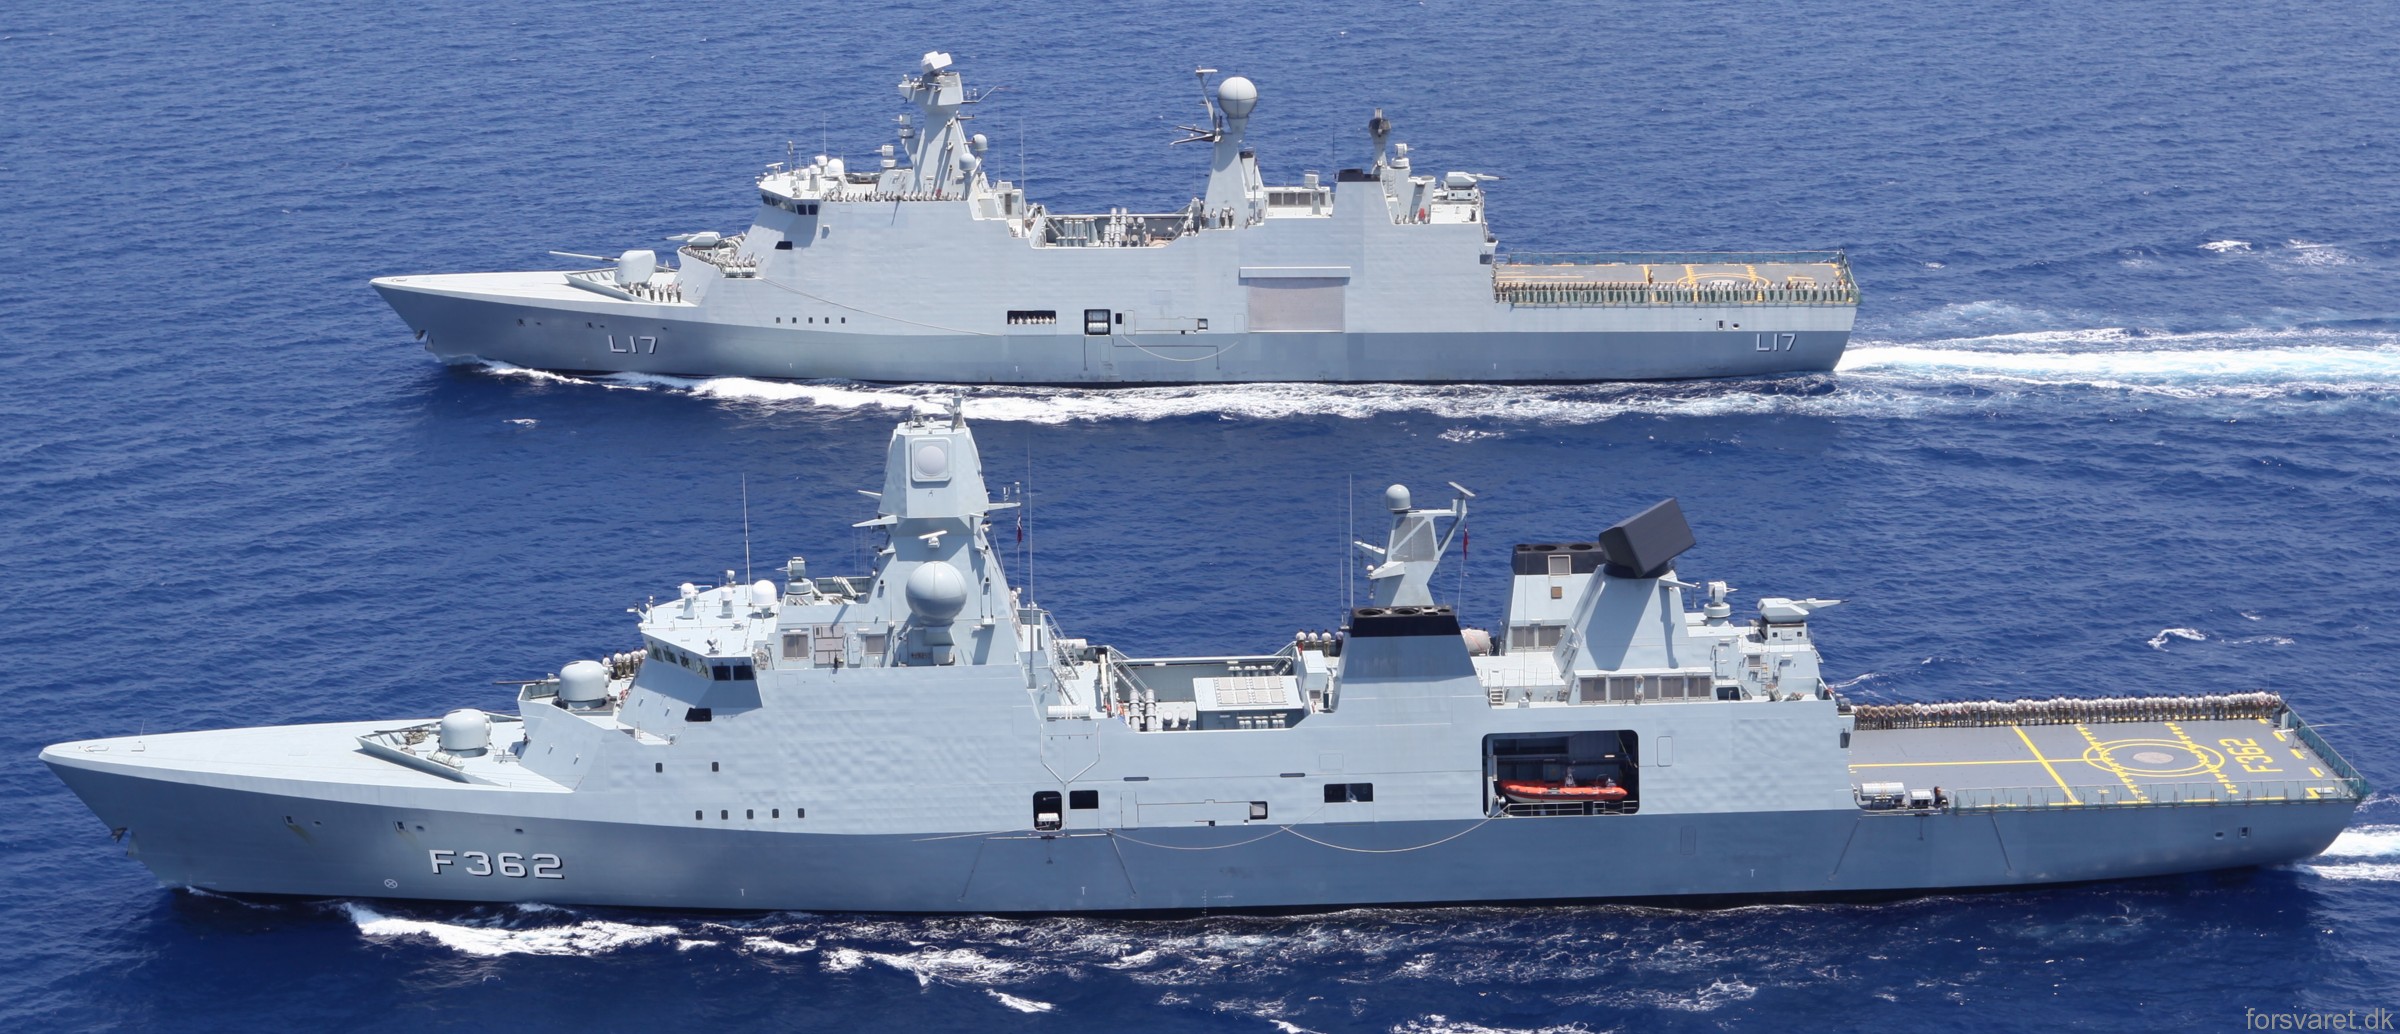 f-362 hdms peter willemoes iver huitfeldt class guided missile frigate ffg royal danish navy 33